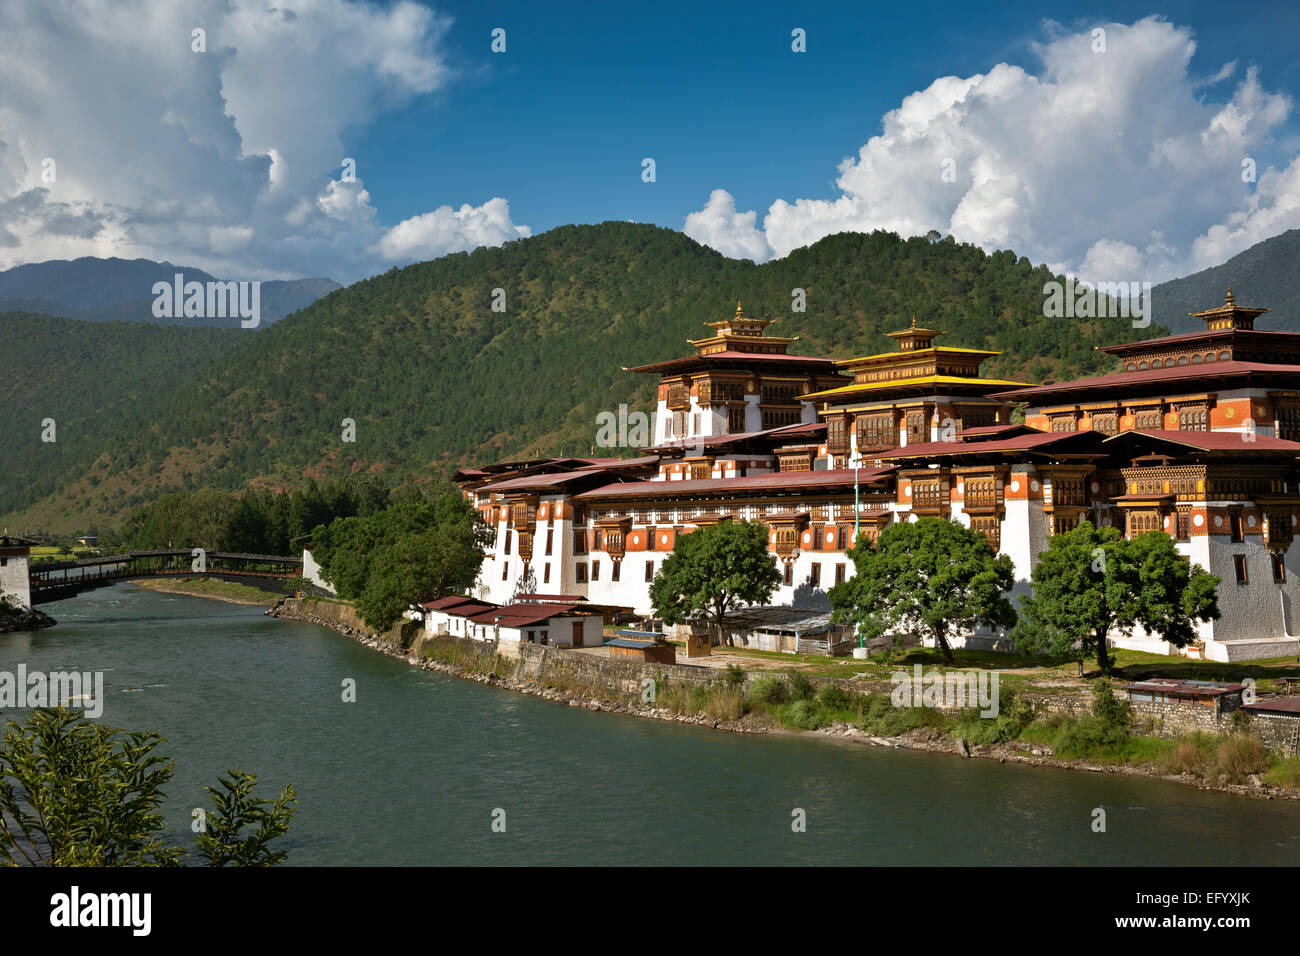 BHUTAN - Punakha Dzong (government offices and monastery), was the capital and seat of government until the mid 1950's. Stock Photo